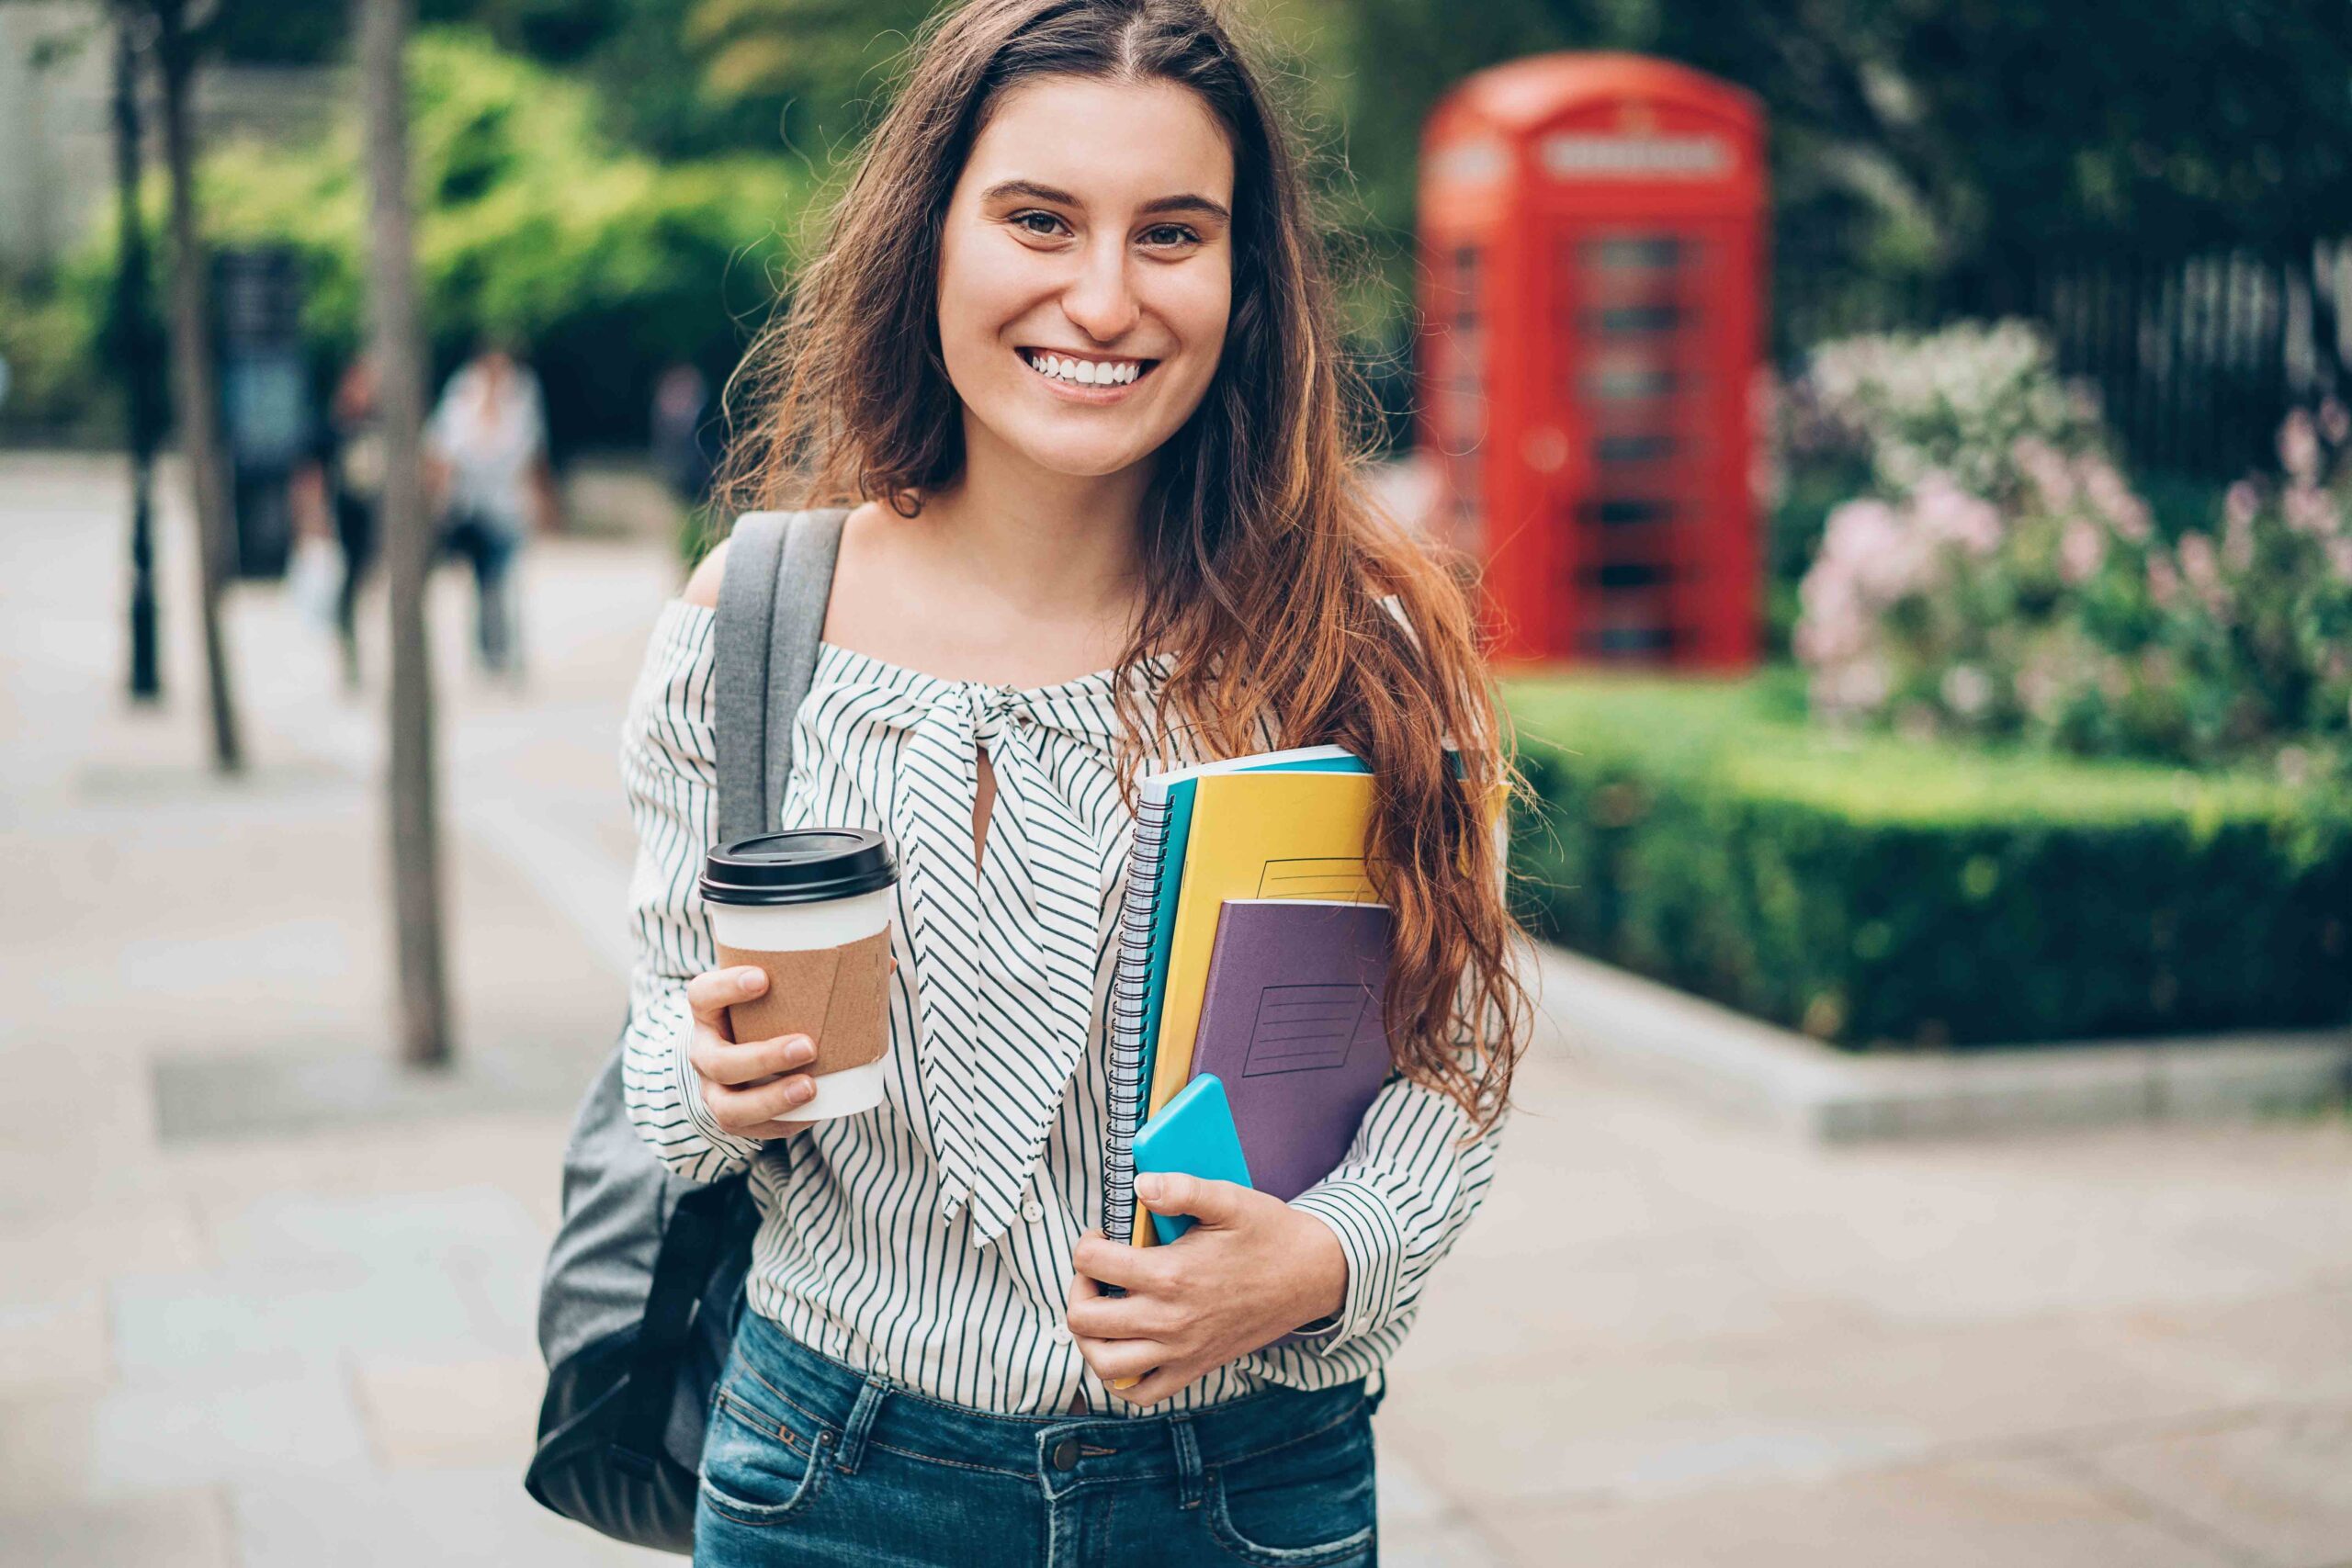 Smiling student walking outdoors